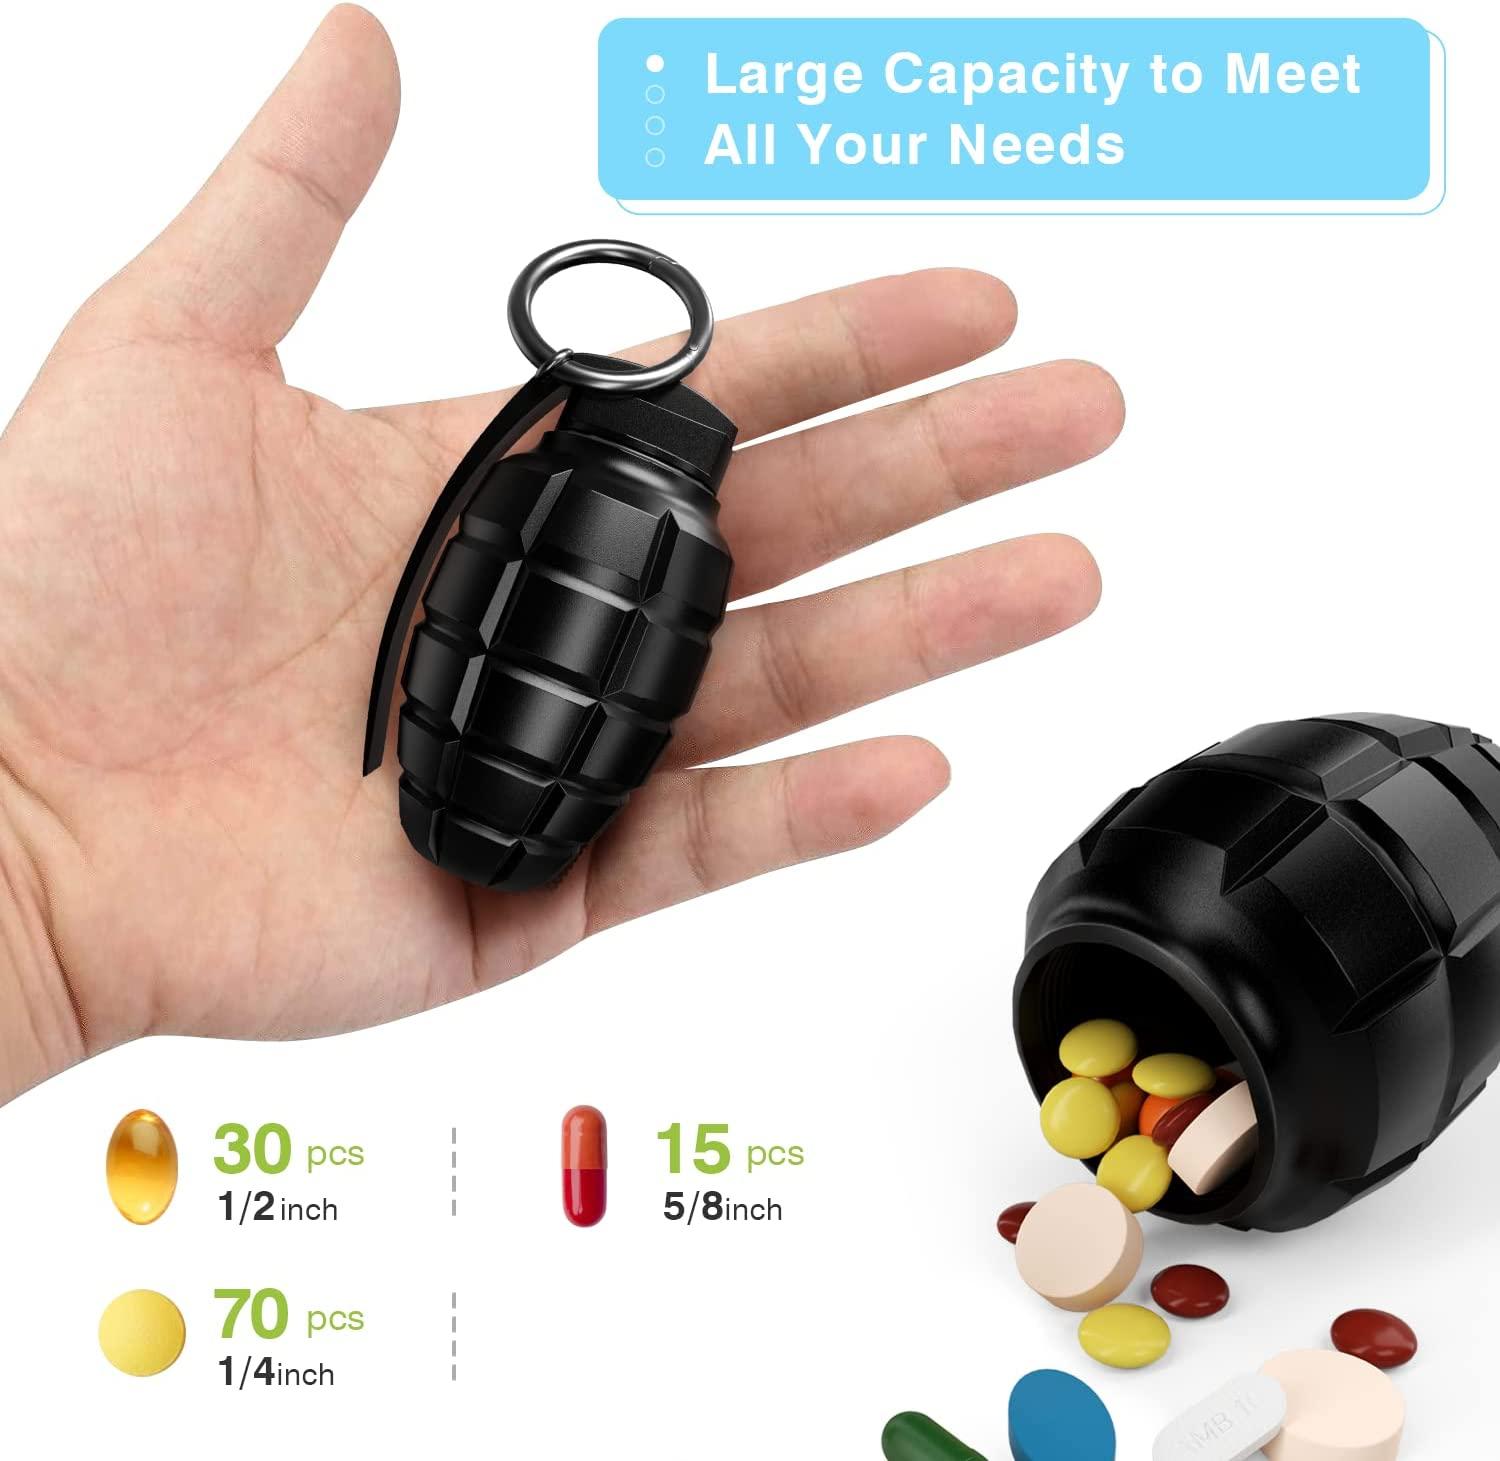 EDC Waterproof Container Keychain Holder / Case / Purse, Emergency  Accessory Organizer Bottle Matches Dry Box, Cool Gadget Gifts for Men Outdoor  Survival Camping Travel